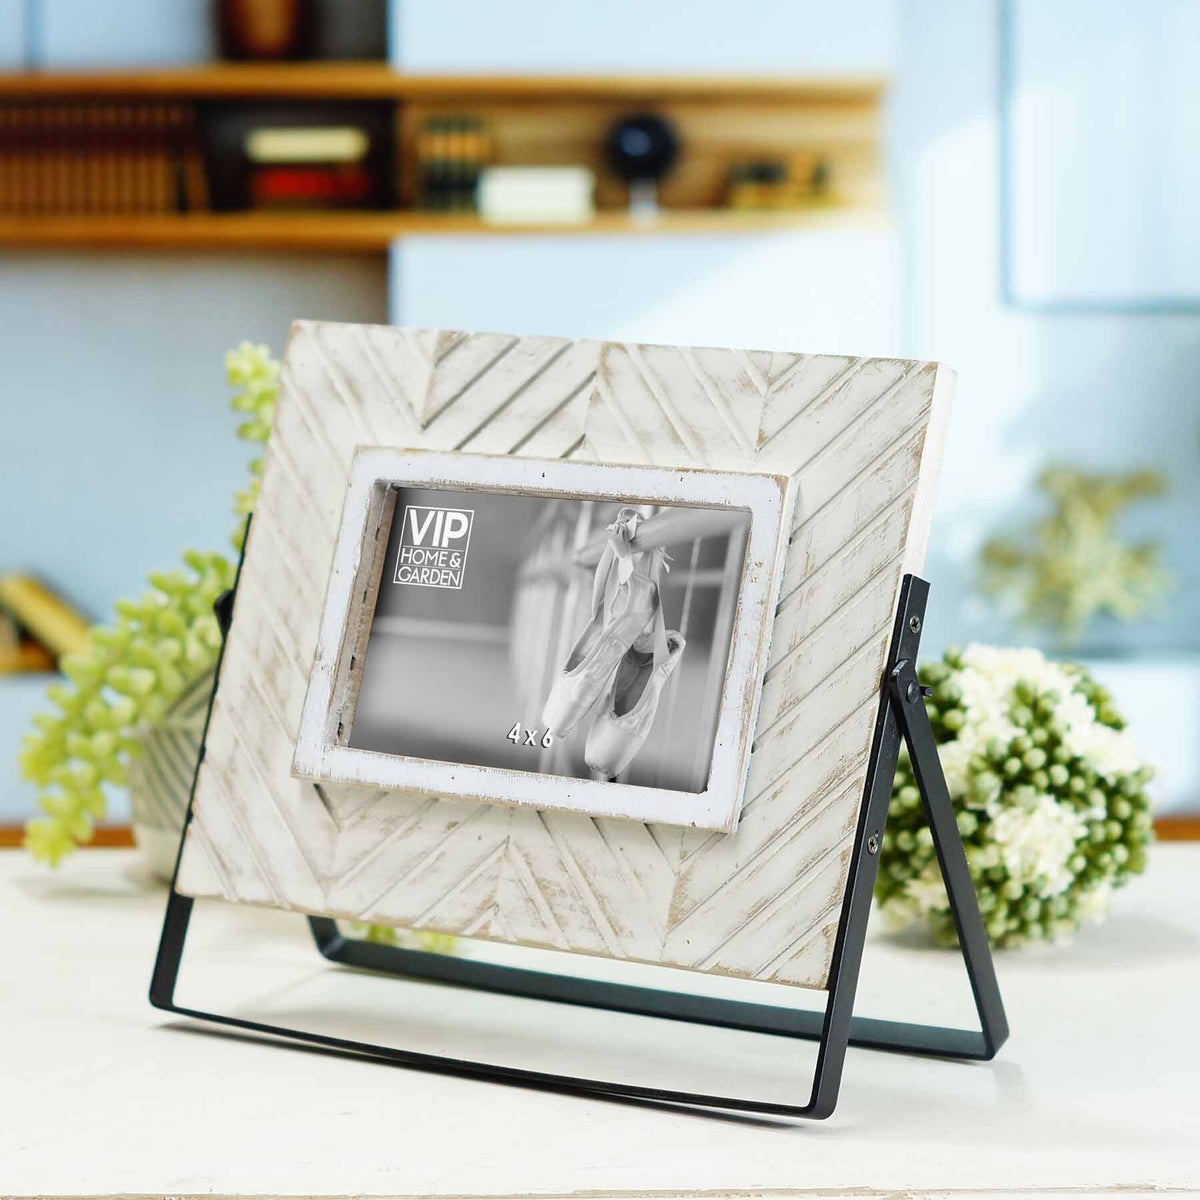 Wd Picture Frame w/ Stand